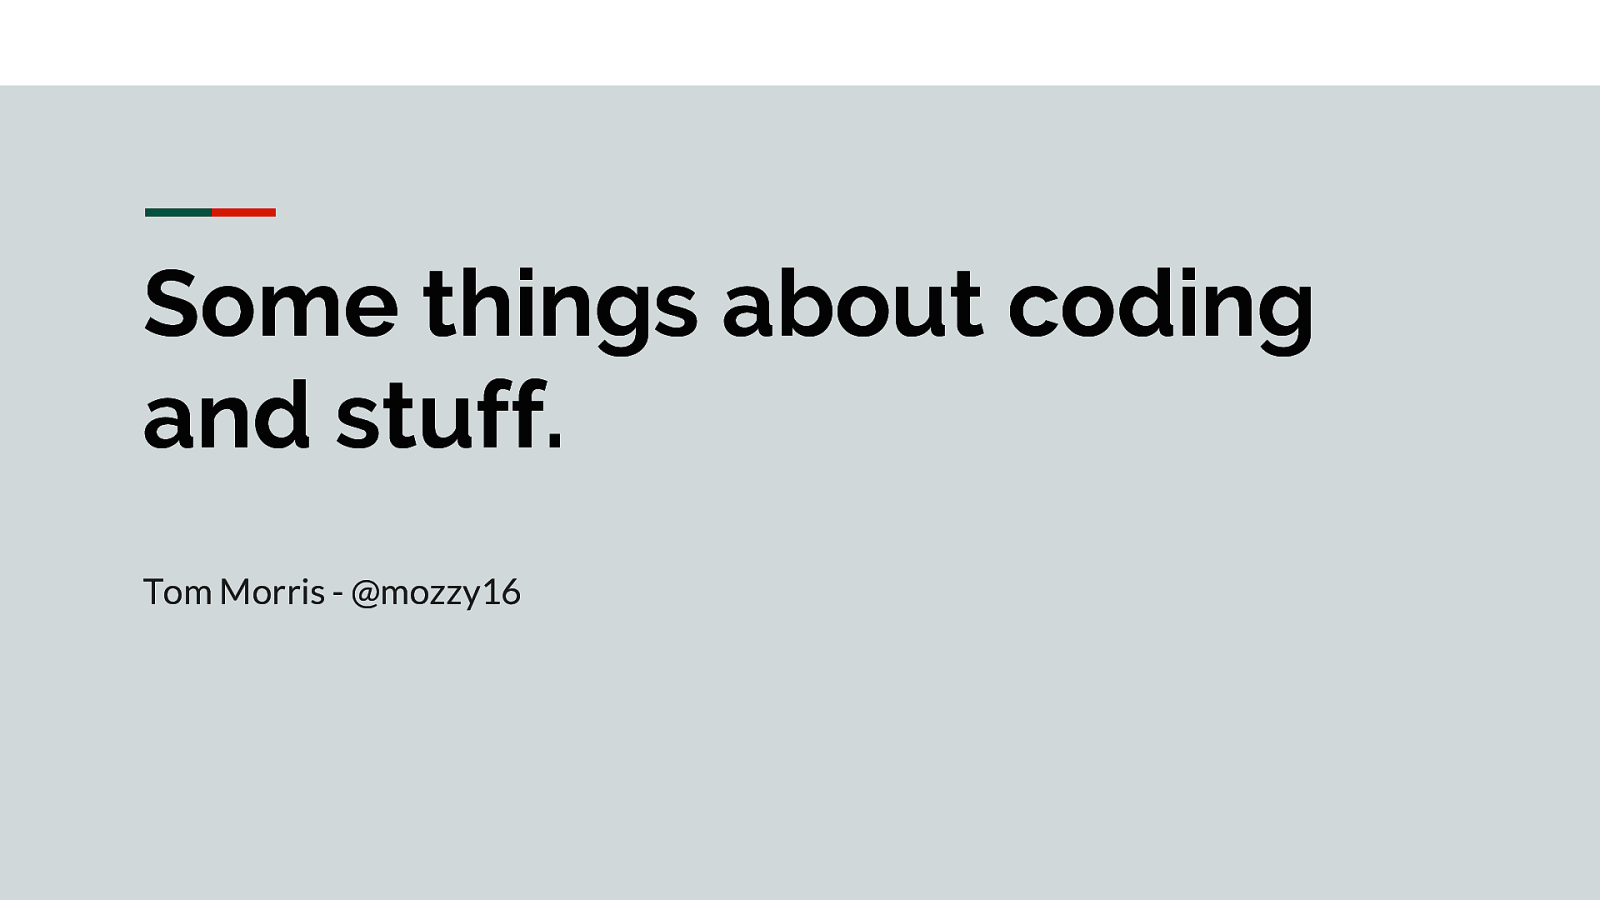 Some things about coding and stuff.